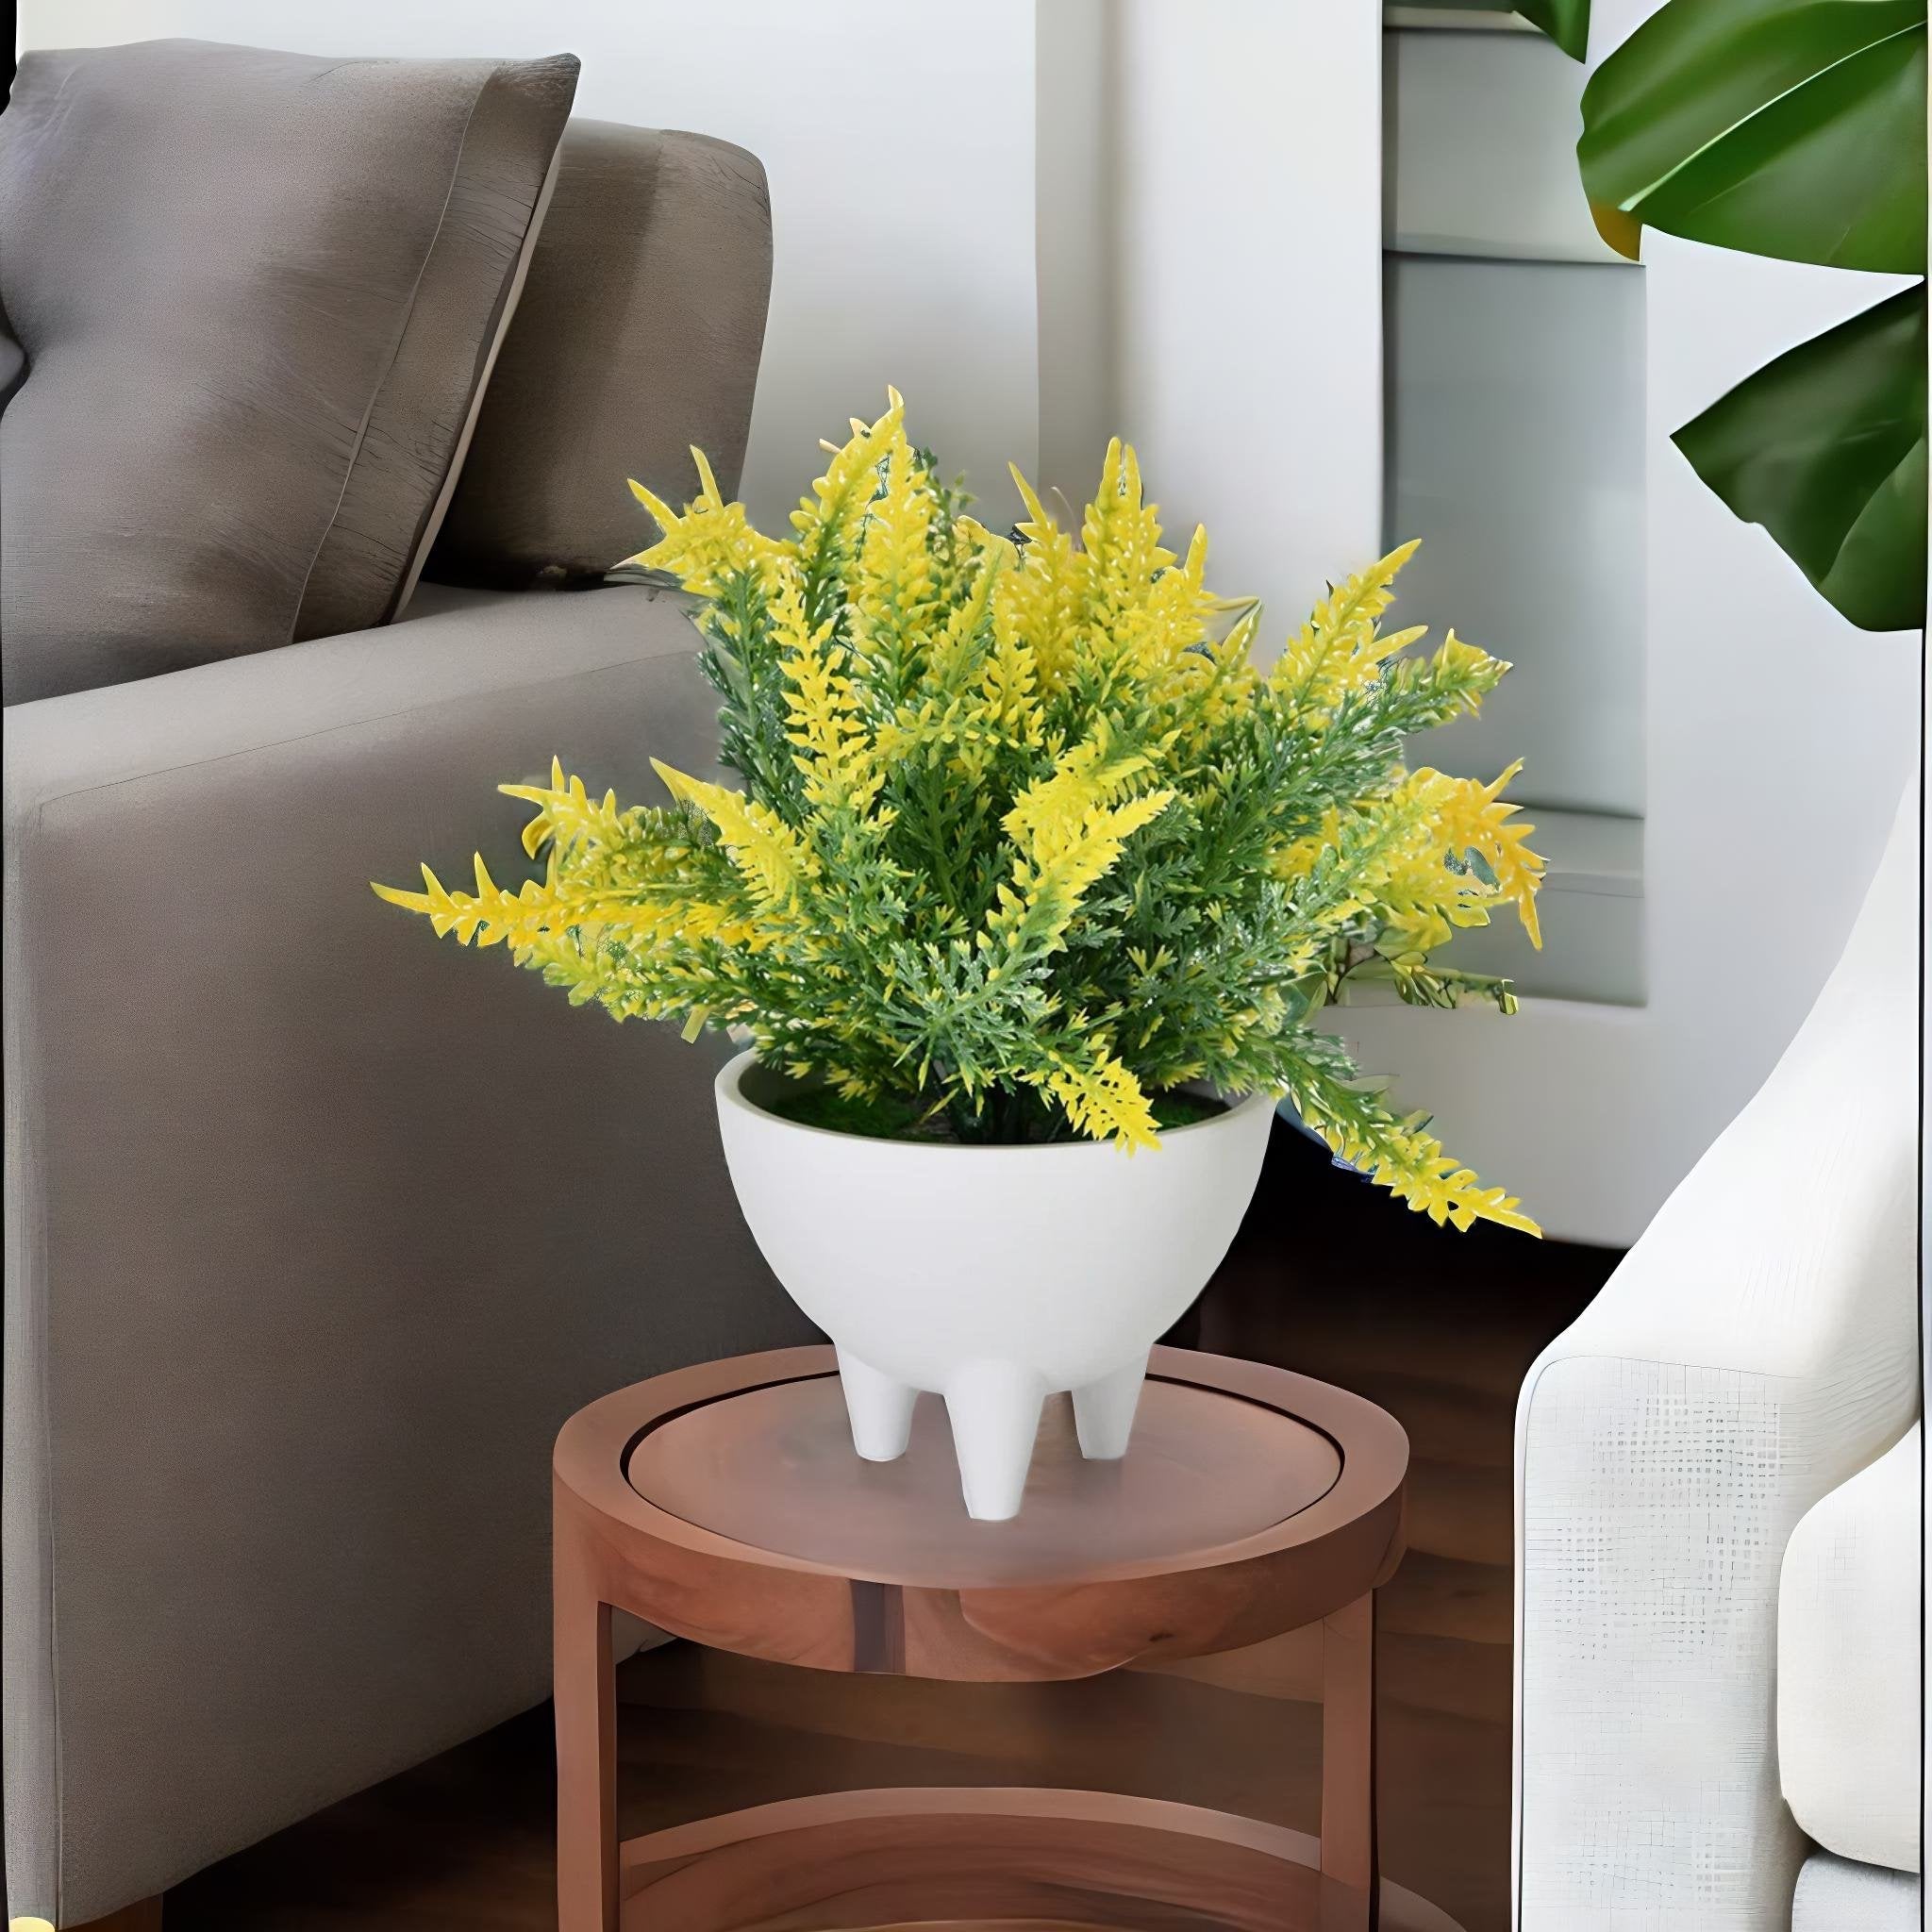 Round Pot With Legs Artificial Plant (Yellow)